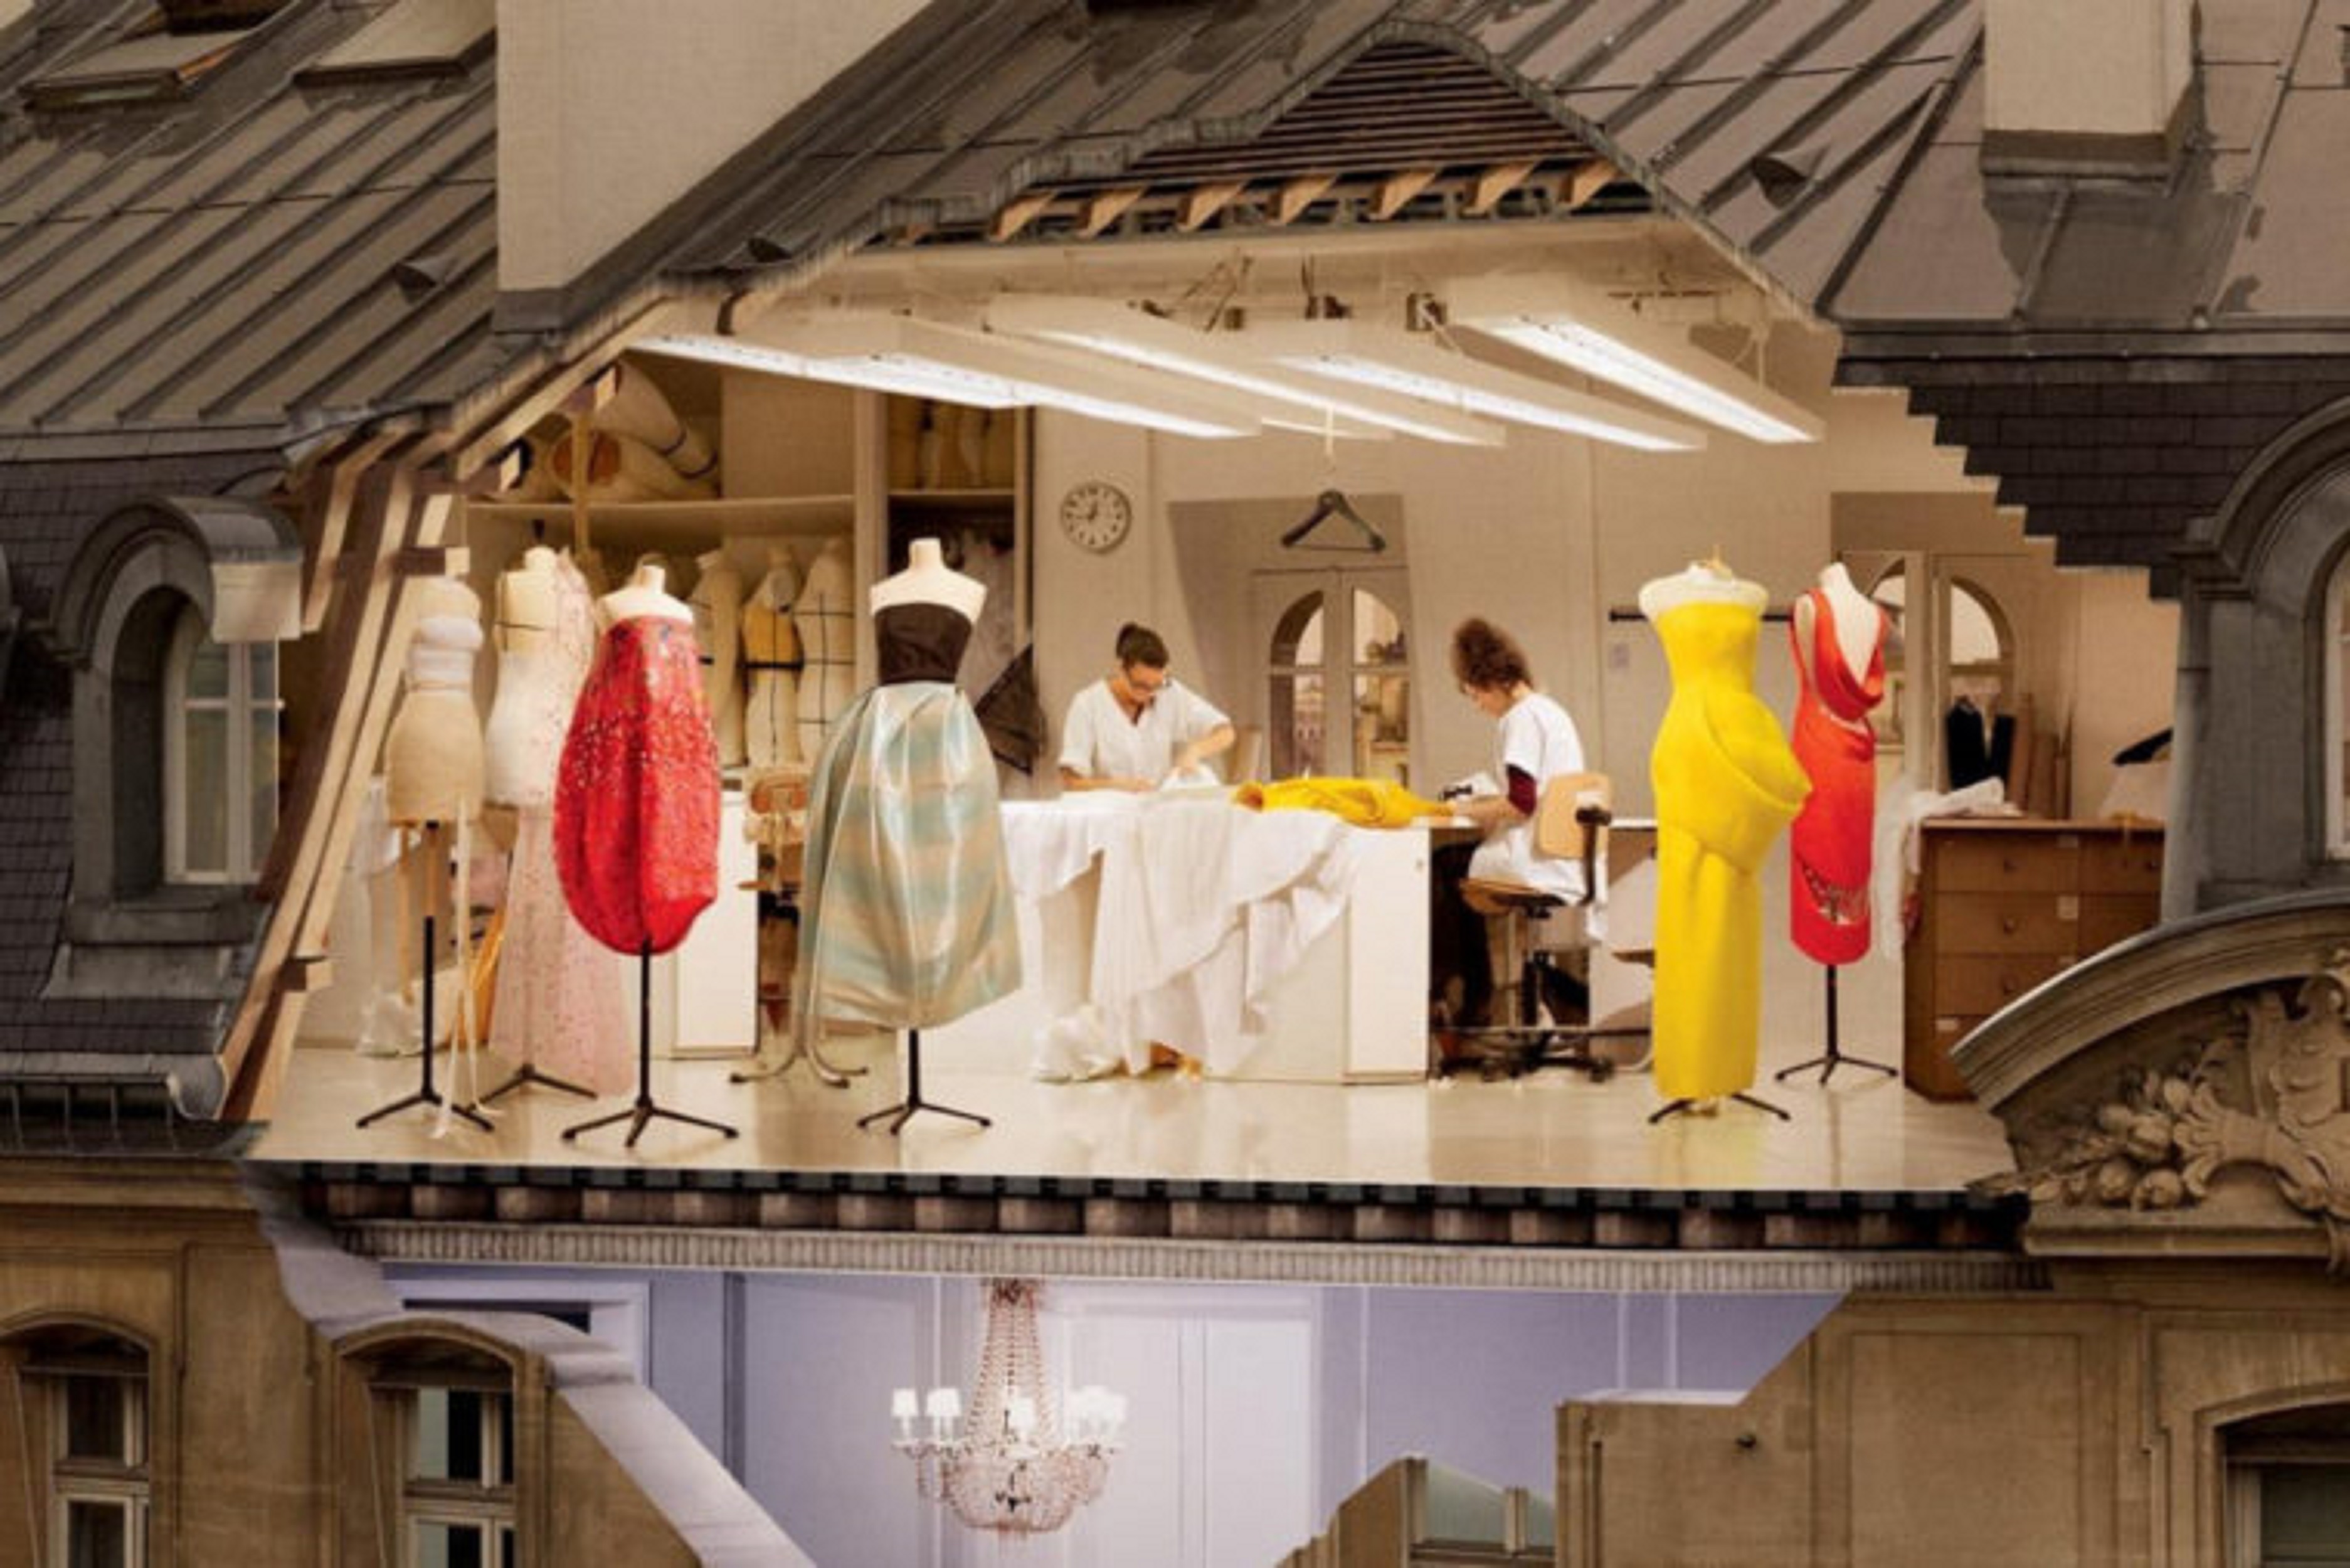 LVMH - Louis Vuitton inaugurated its 16th workshop in